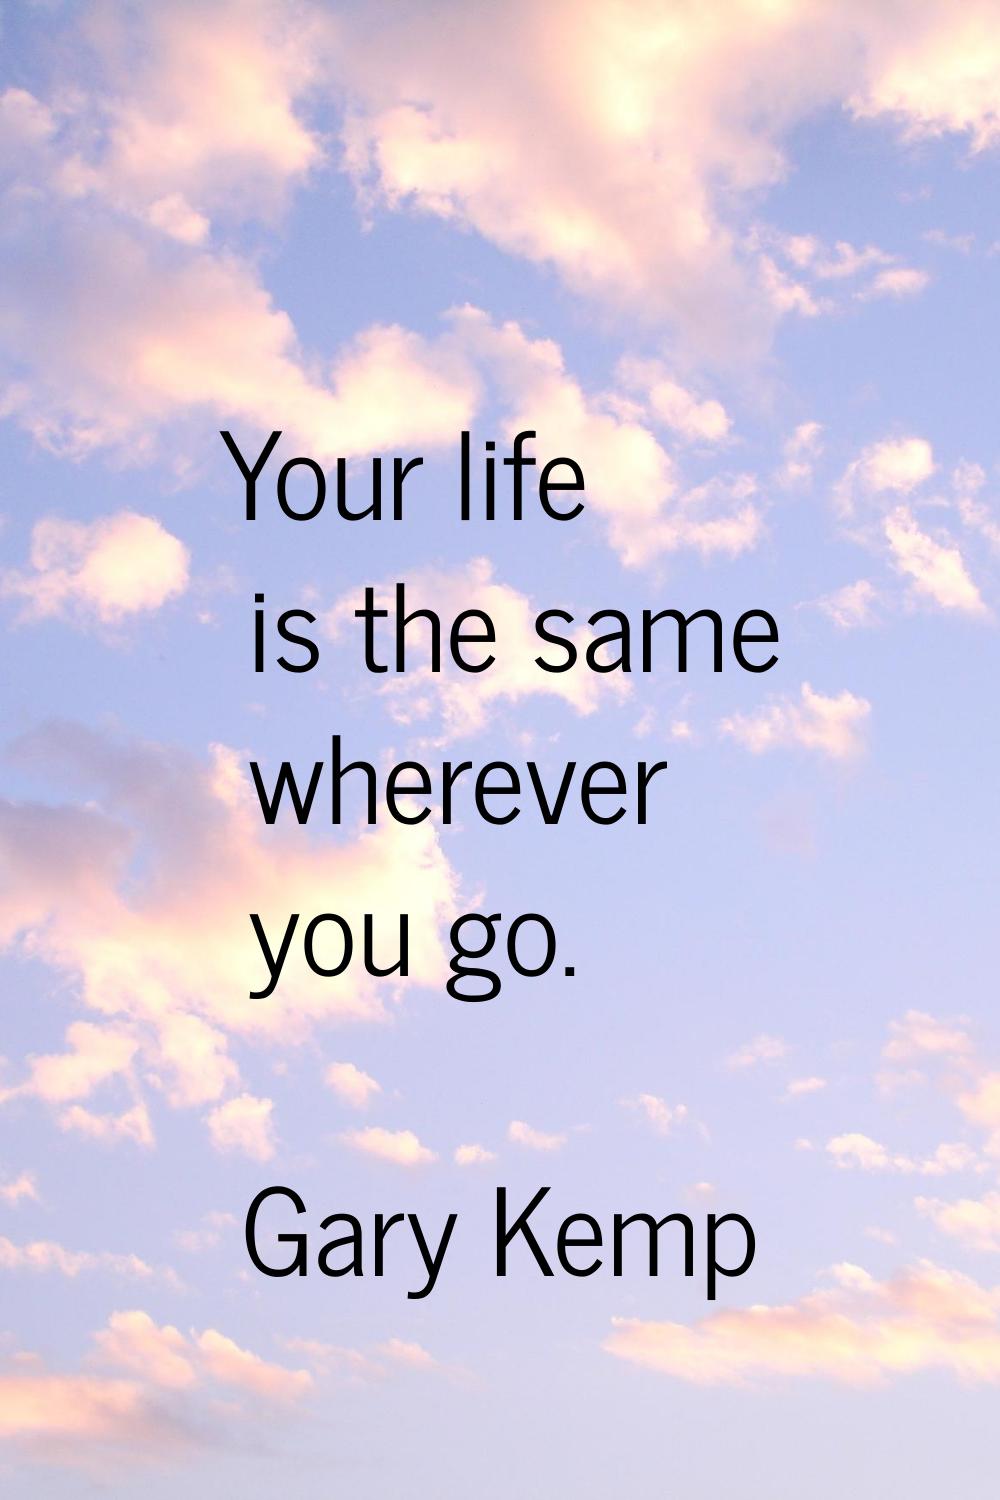 Your life is the same wherever you go.